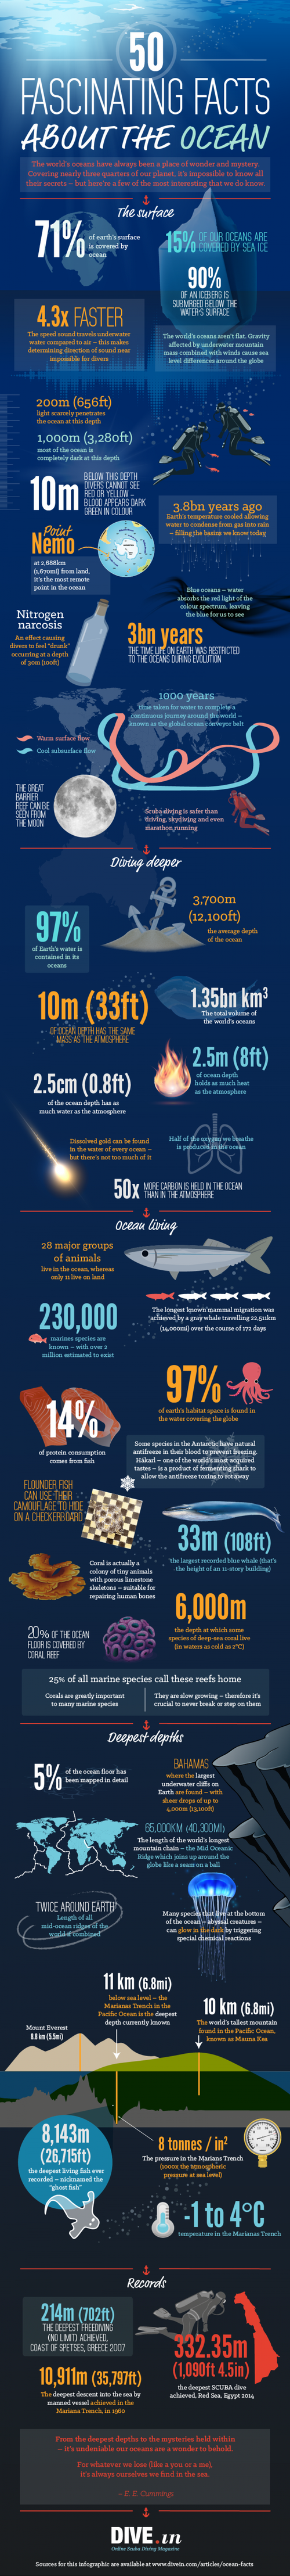 50-fascinating-facts-about-the-ocean